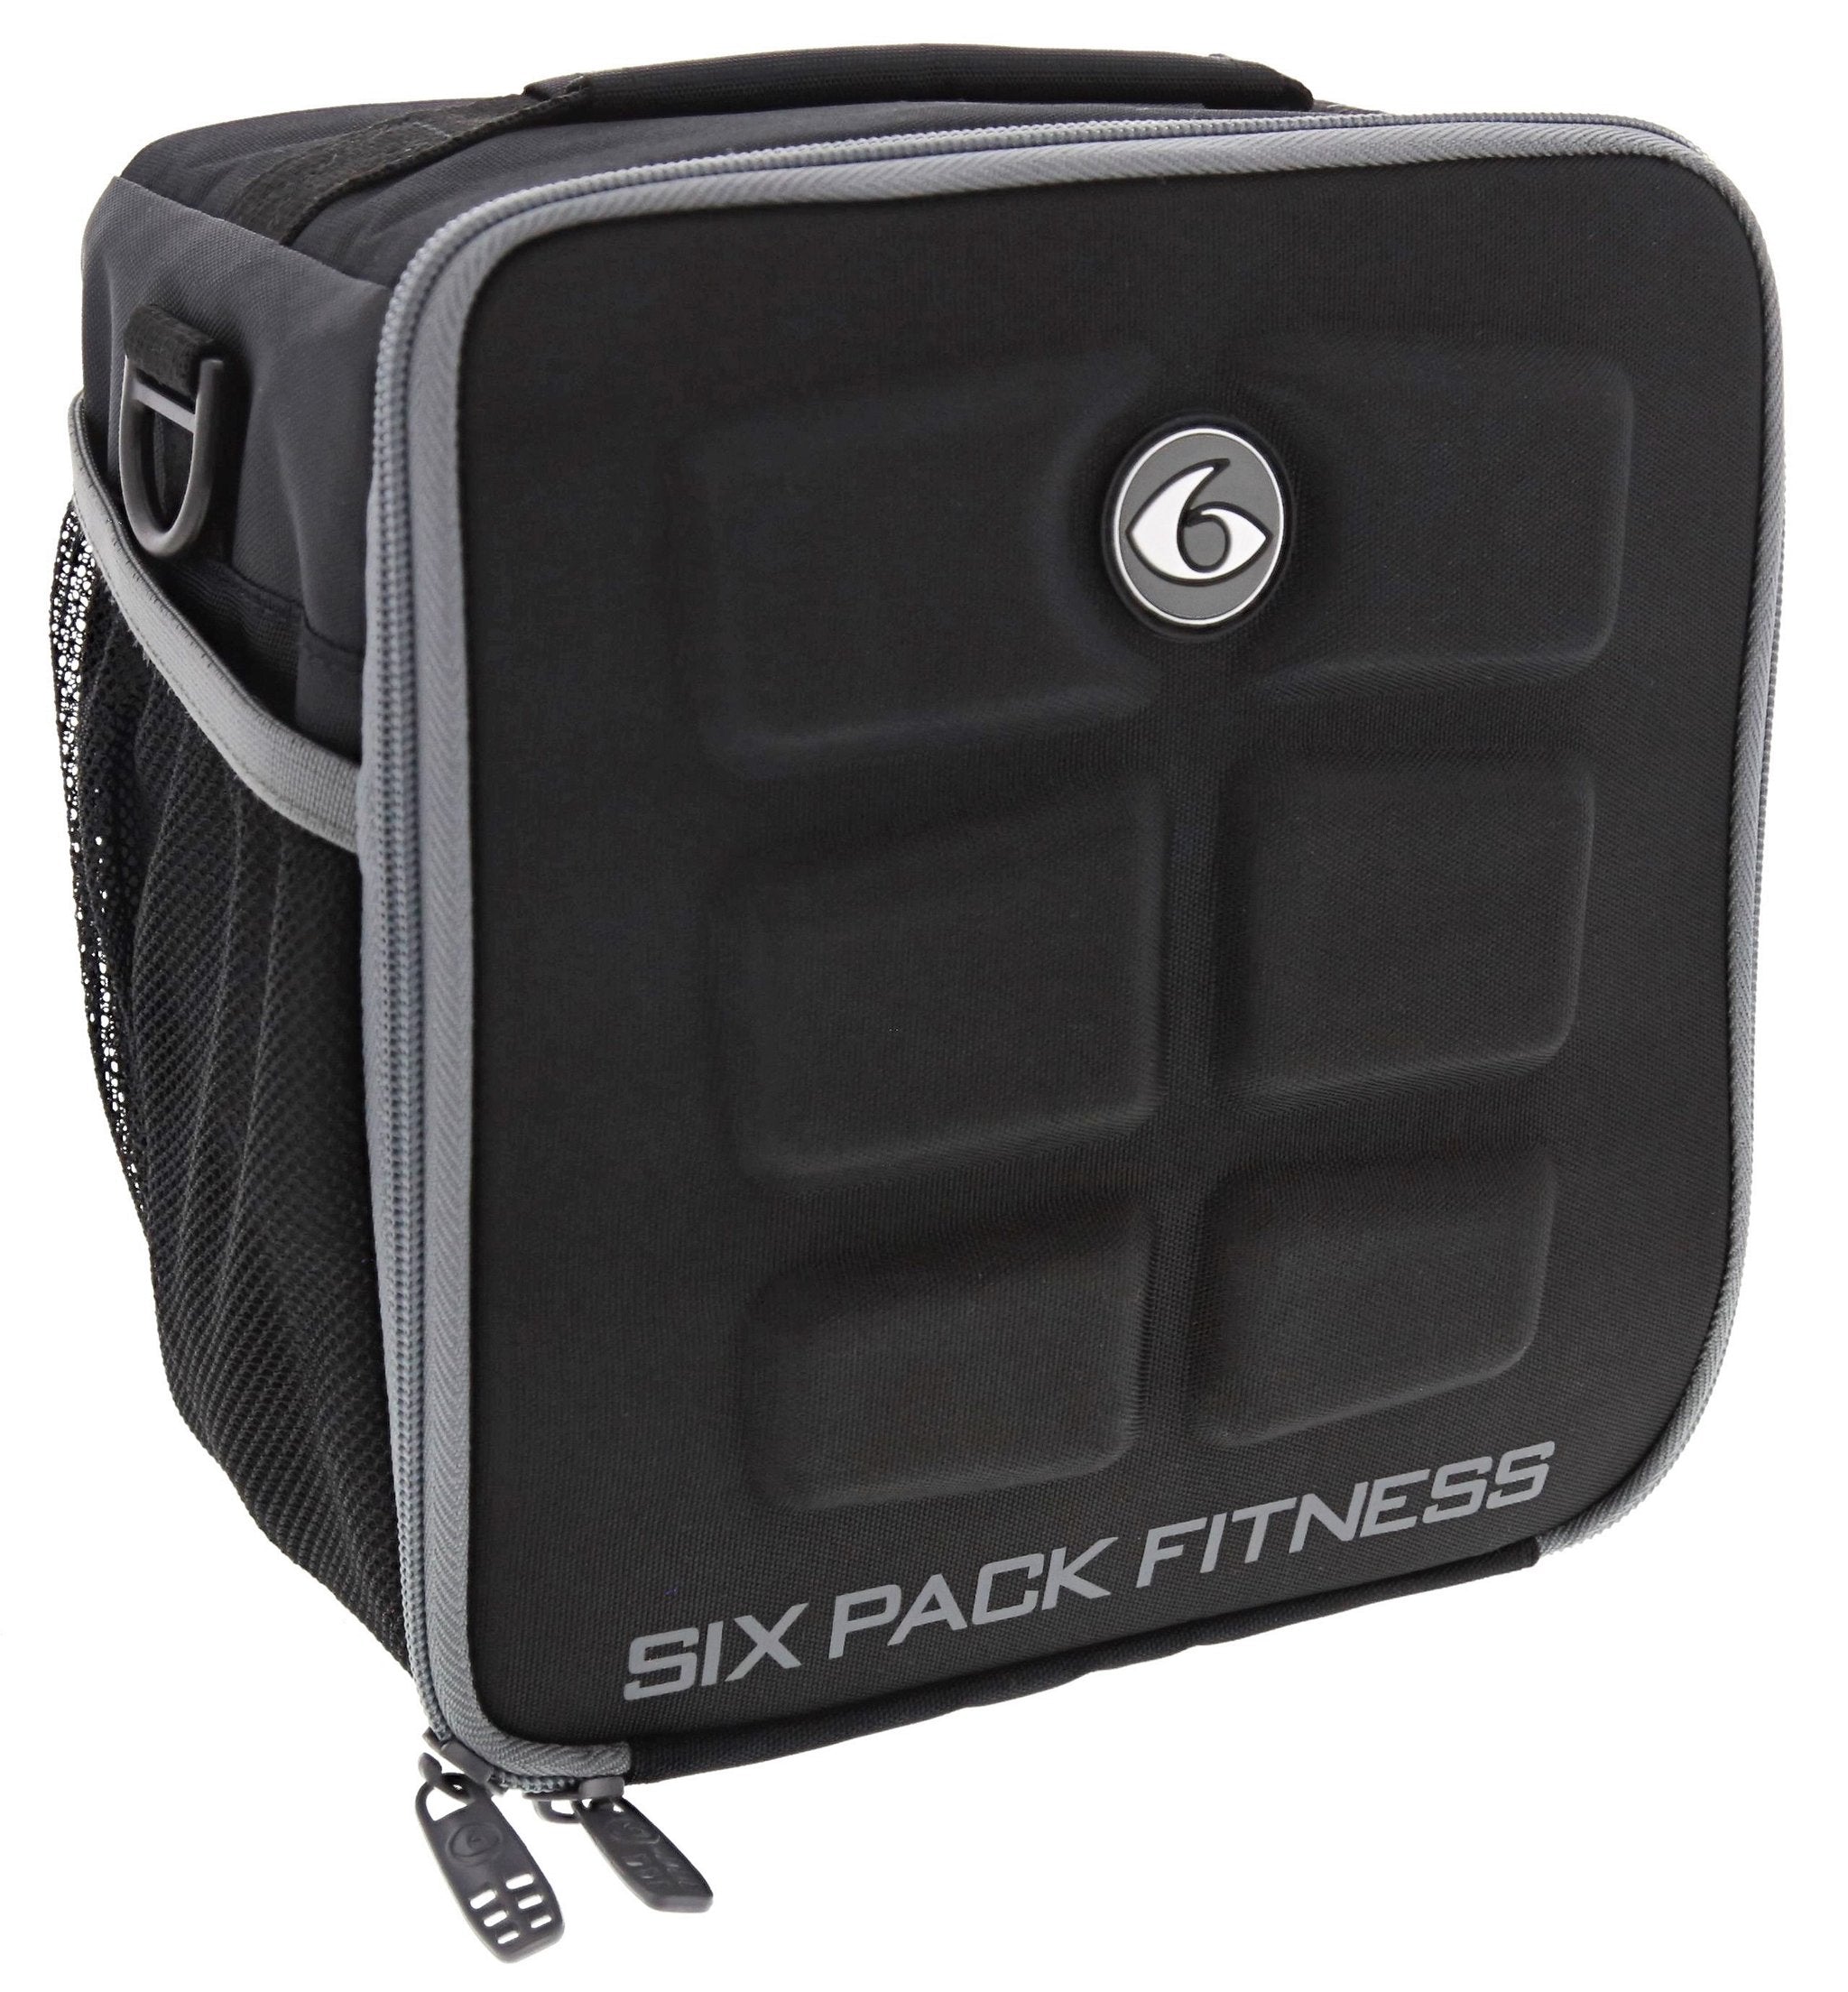 https://cdn.shopify.com/s/files/1/0012/6379/6273/products/6packfitness_817963013141_MP_2048x_e6b0d7f0-5b93-4aed-a4dc-17c7dd935d22.jpg